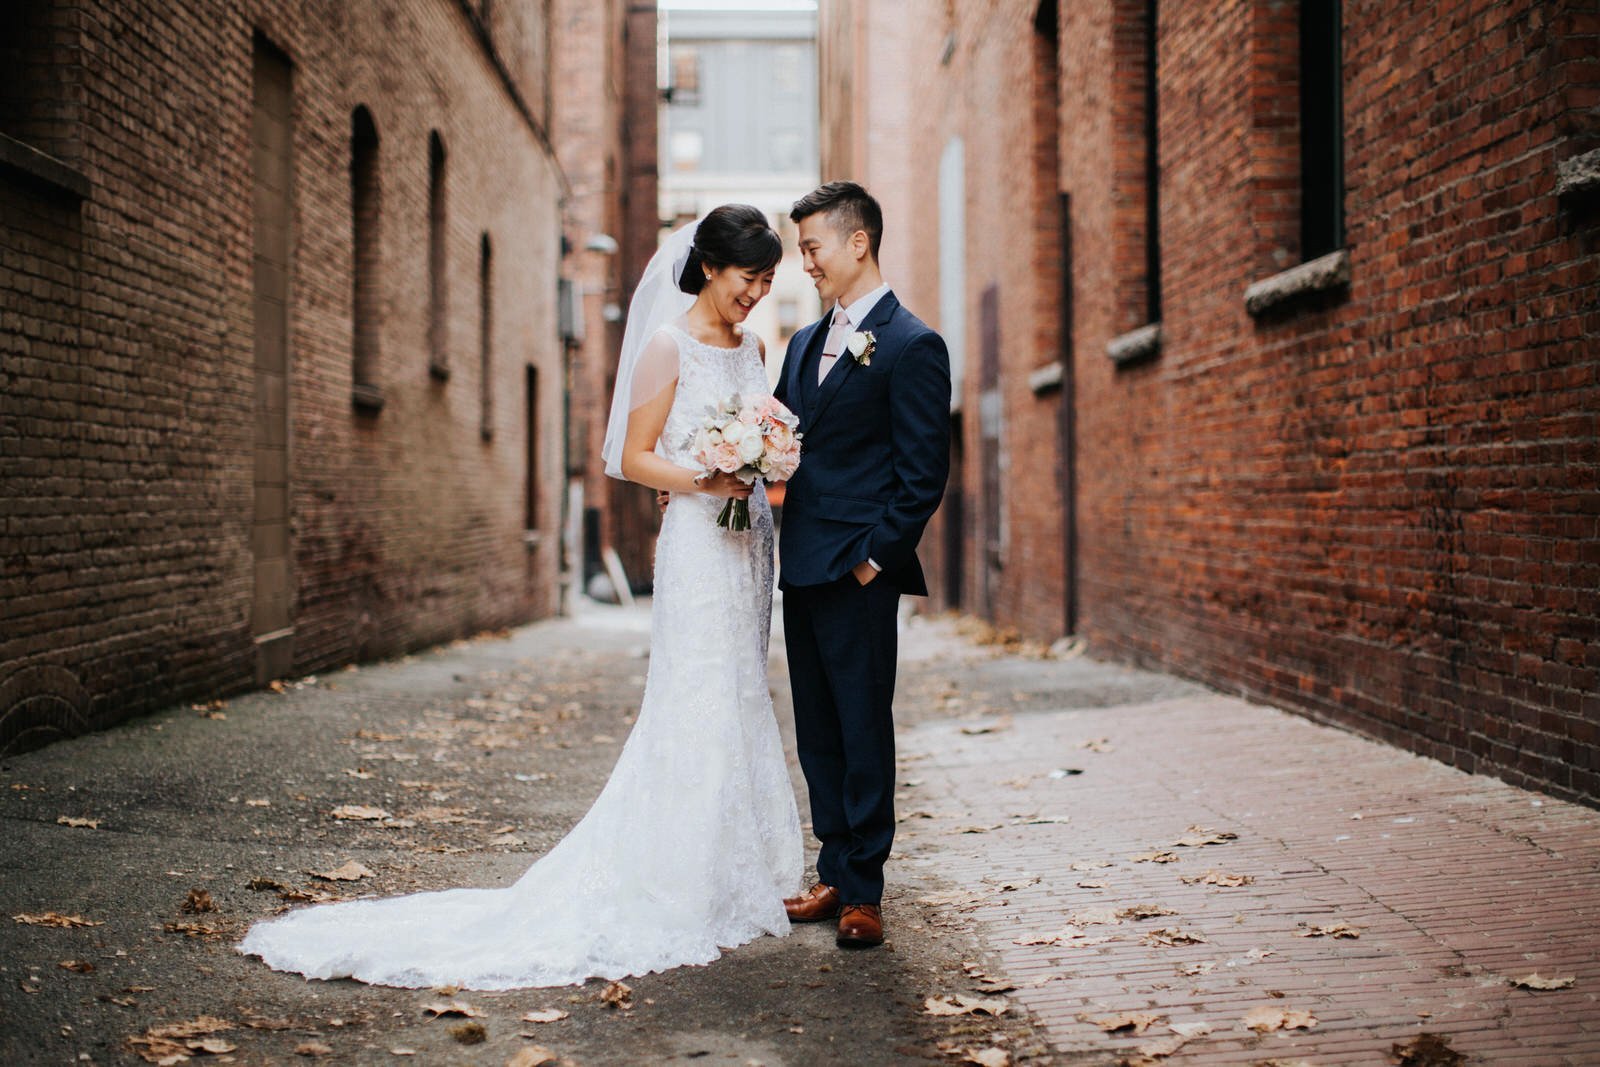 The couple poses in an alleyway in pioneer square during wedding photos at hotel 1000 